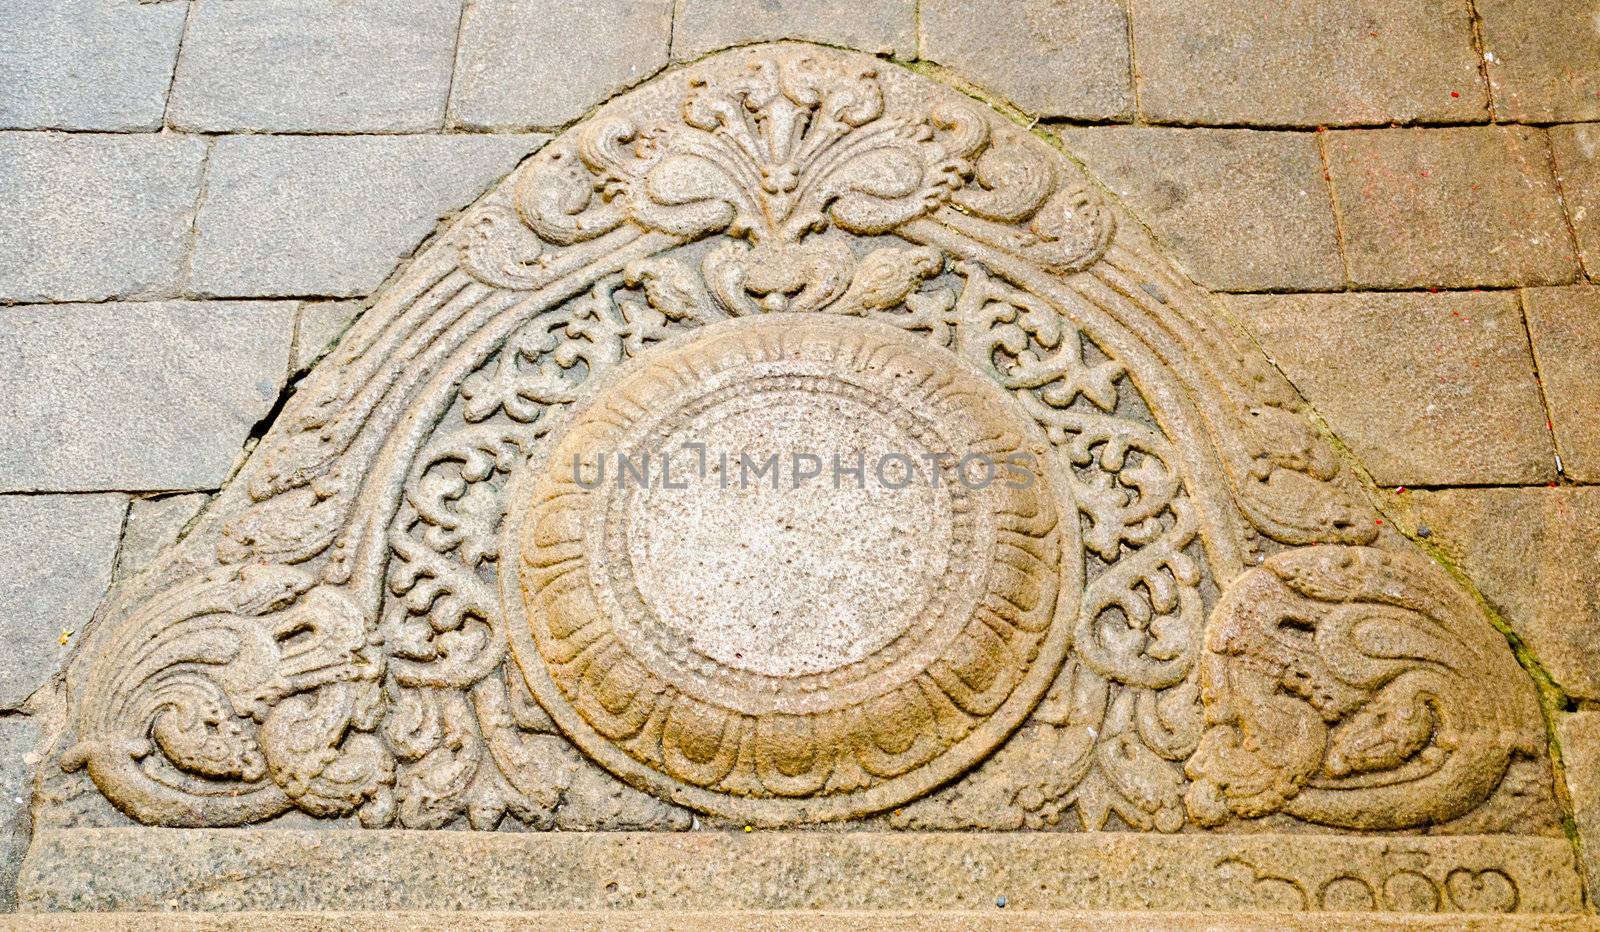 "moon" stone at the entrance to the buddhist temple by Sergieiev